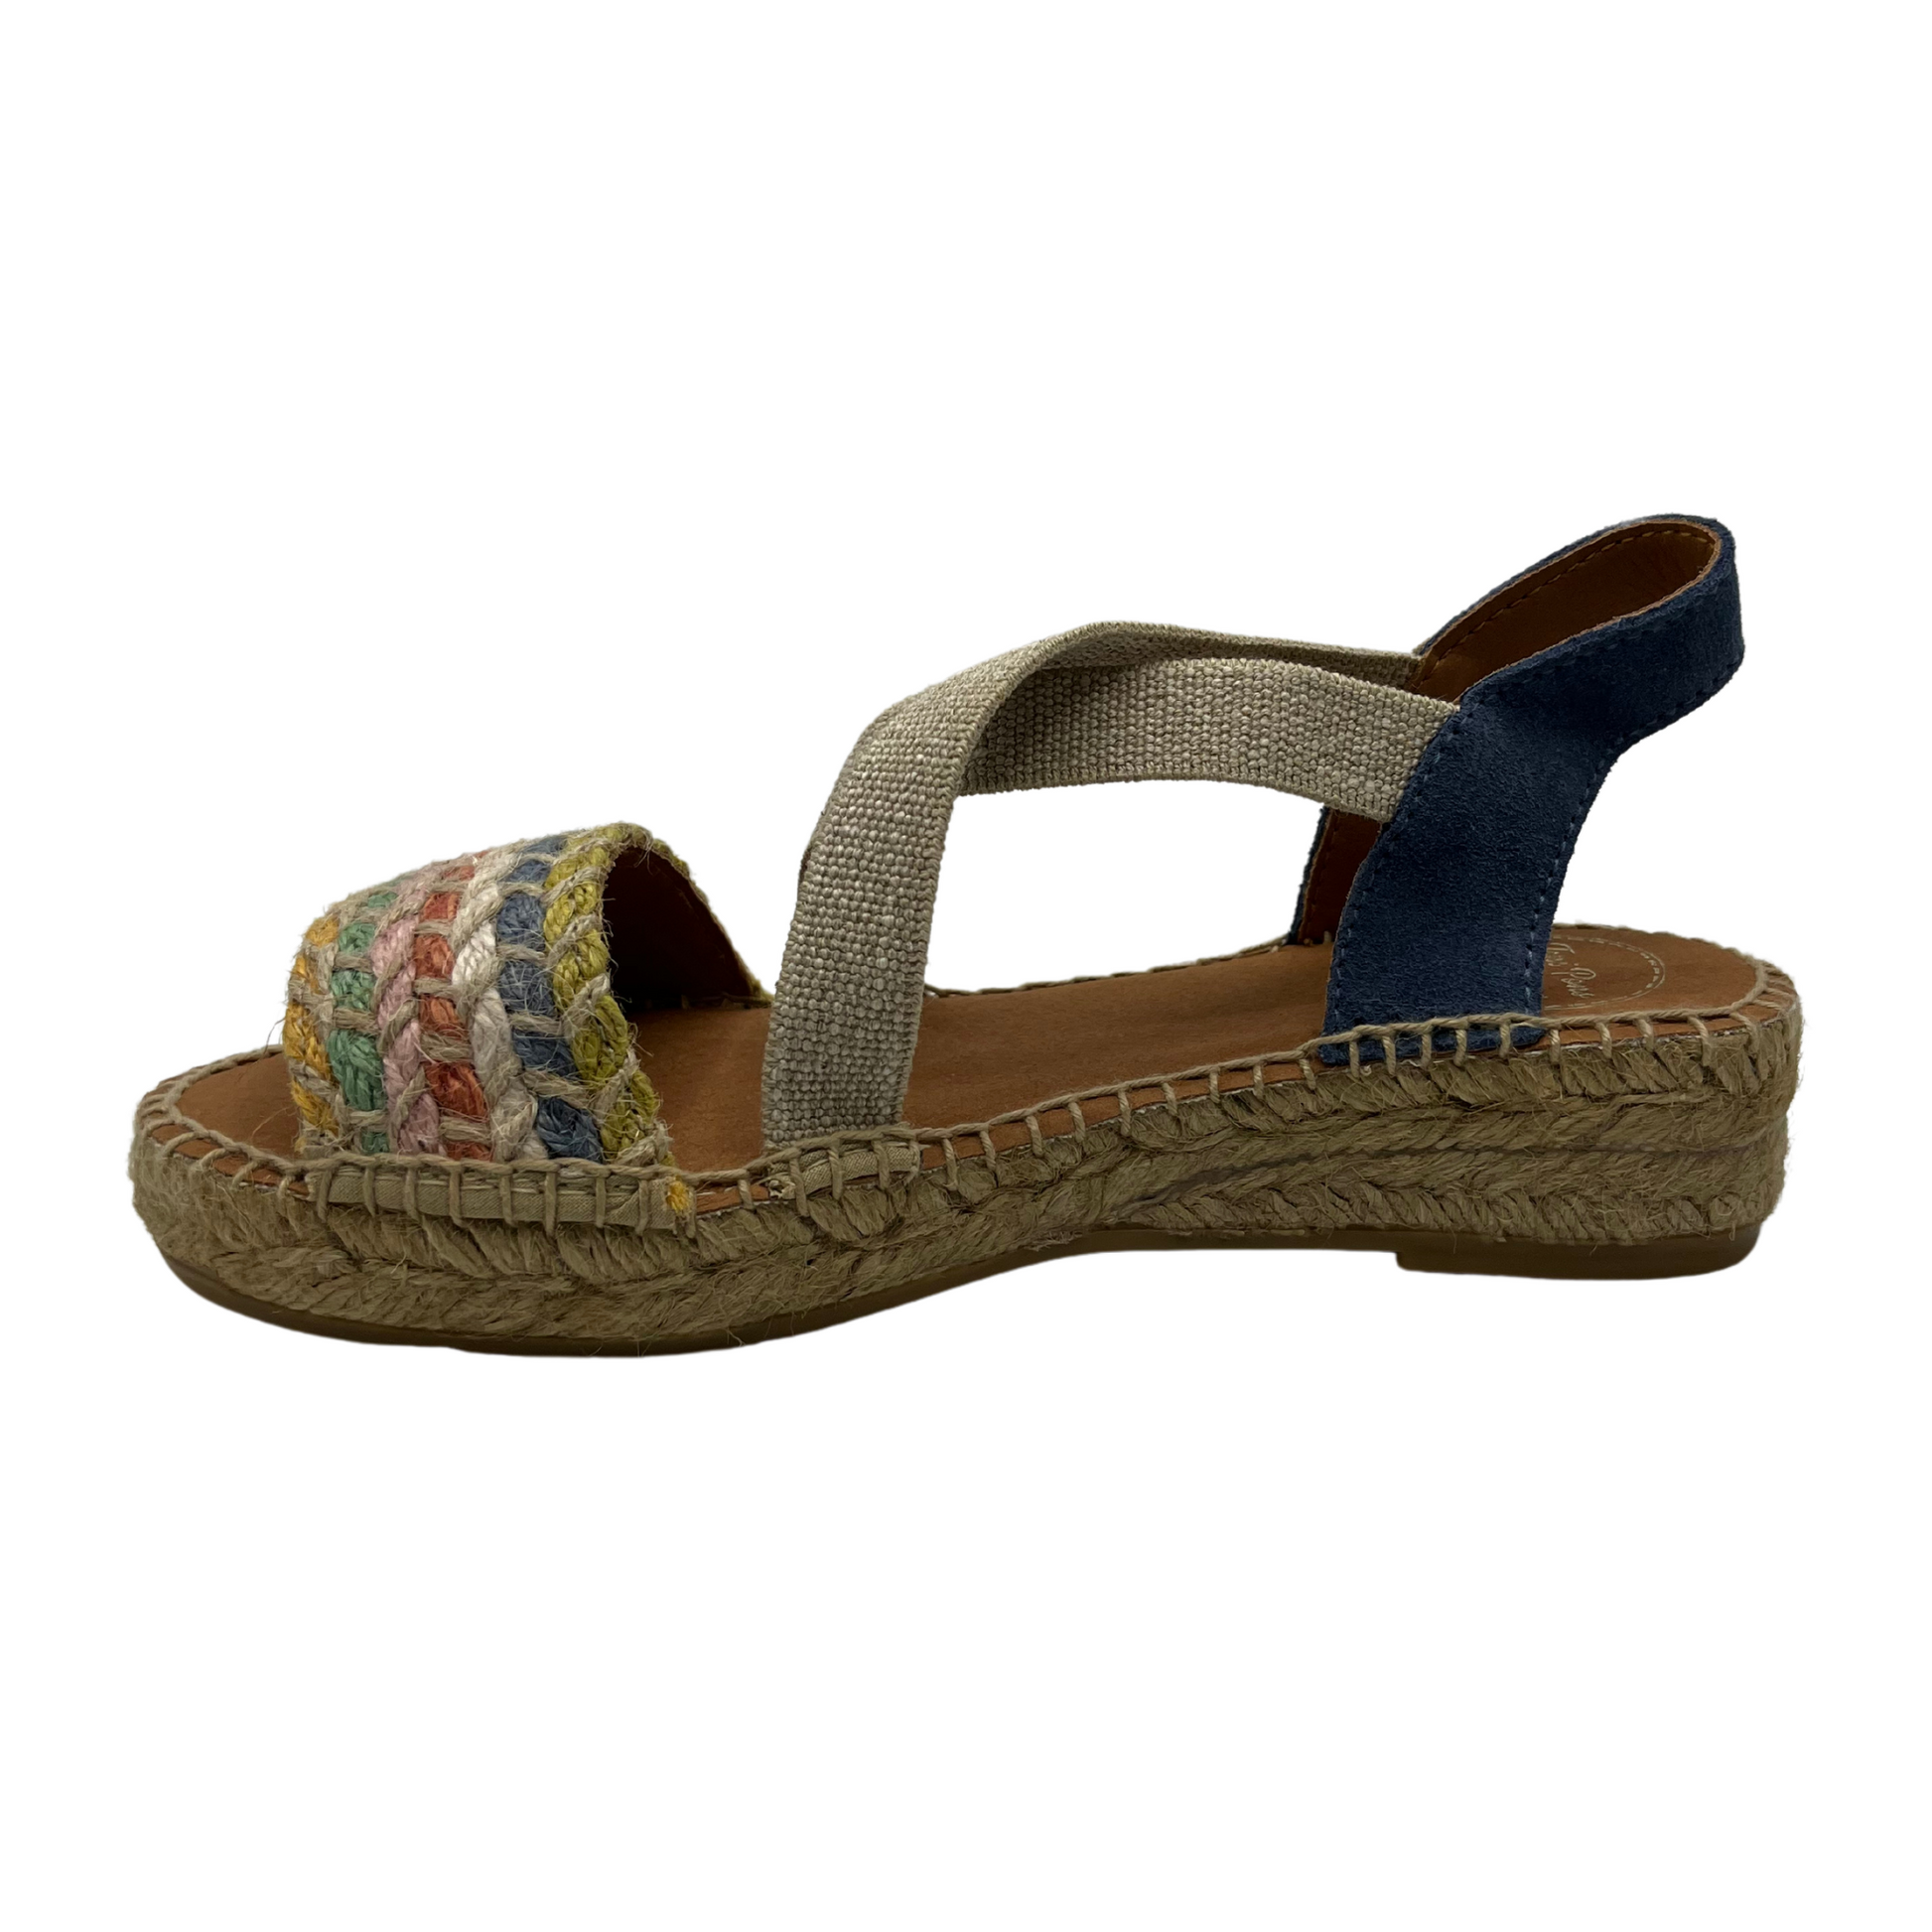 Left facing view of women's espadrille with non-slip rubber bottom and hand stitched details.